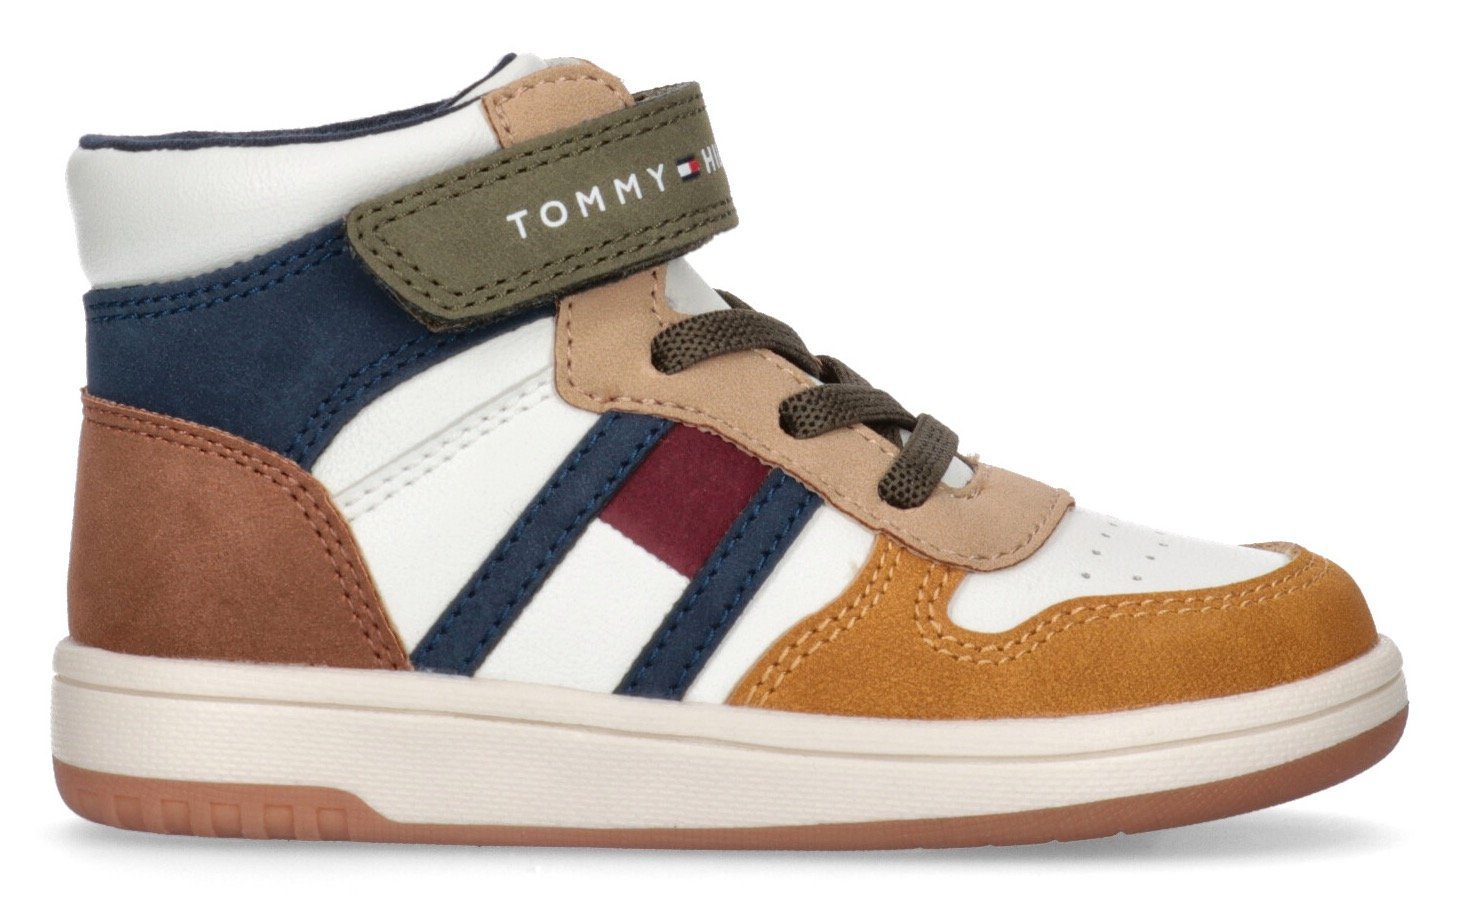 HIGH Sneaker LACE-UP/VELCRO Hilfiger Look FLAG modischen SNEAKER colorblocking Tommy TOP im